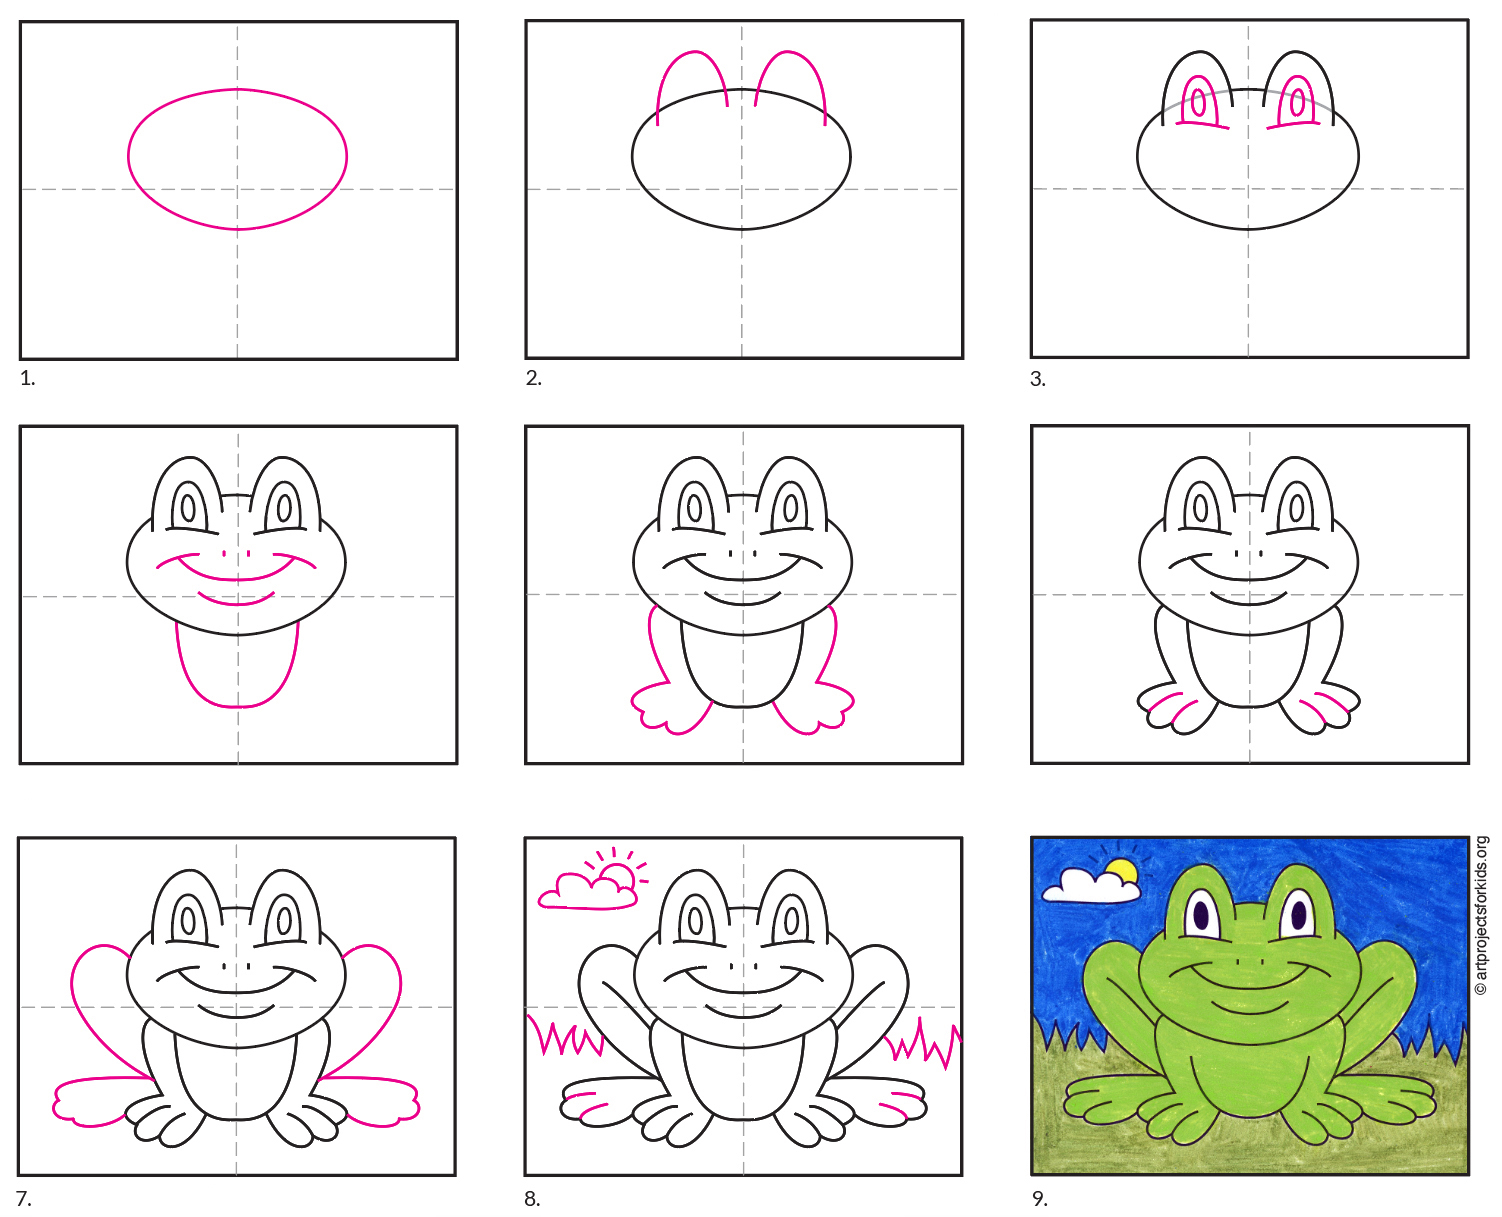 How To Draw A Simple Frog For Kids - canvas-ily